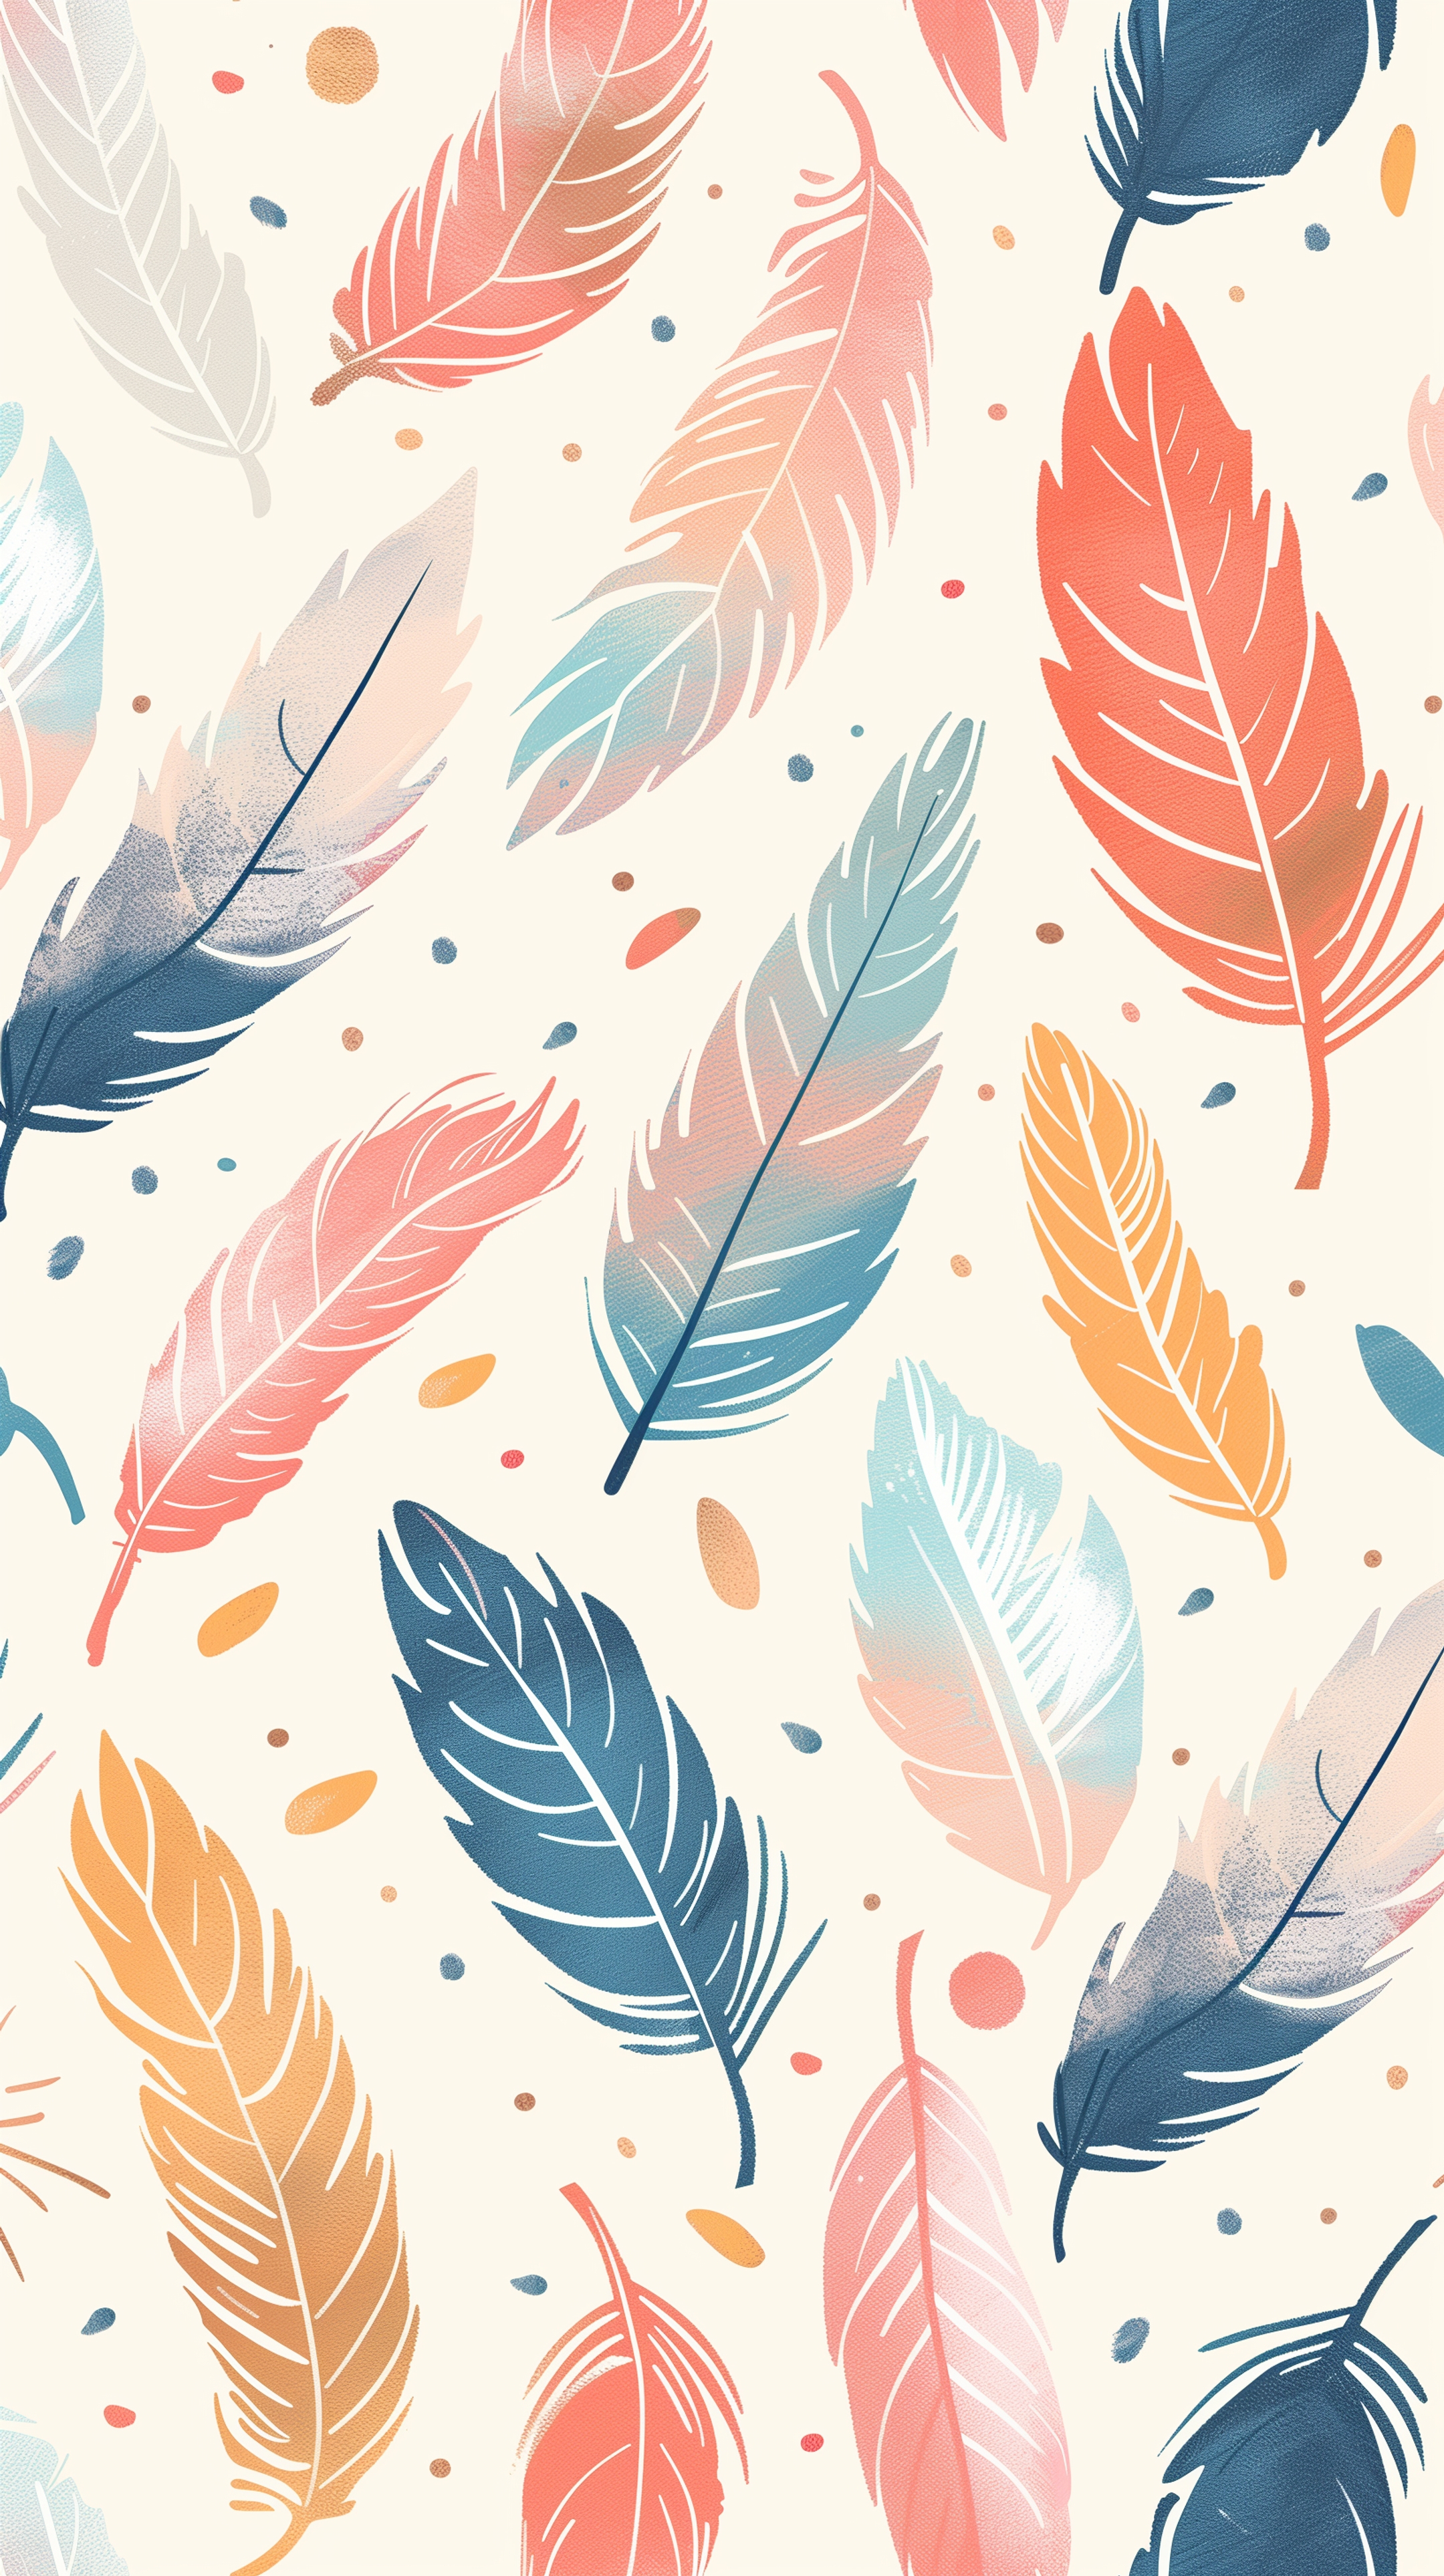 Colorful Feathers Design for Kids Hintergrund[385f1366577146a2b959]